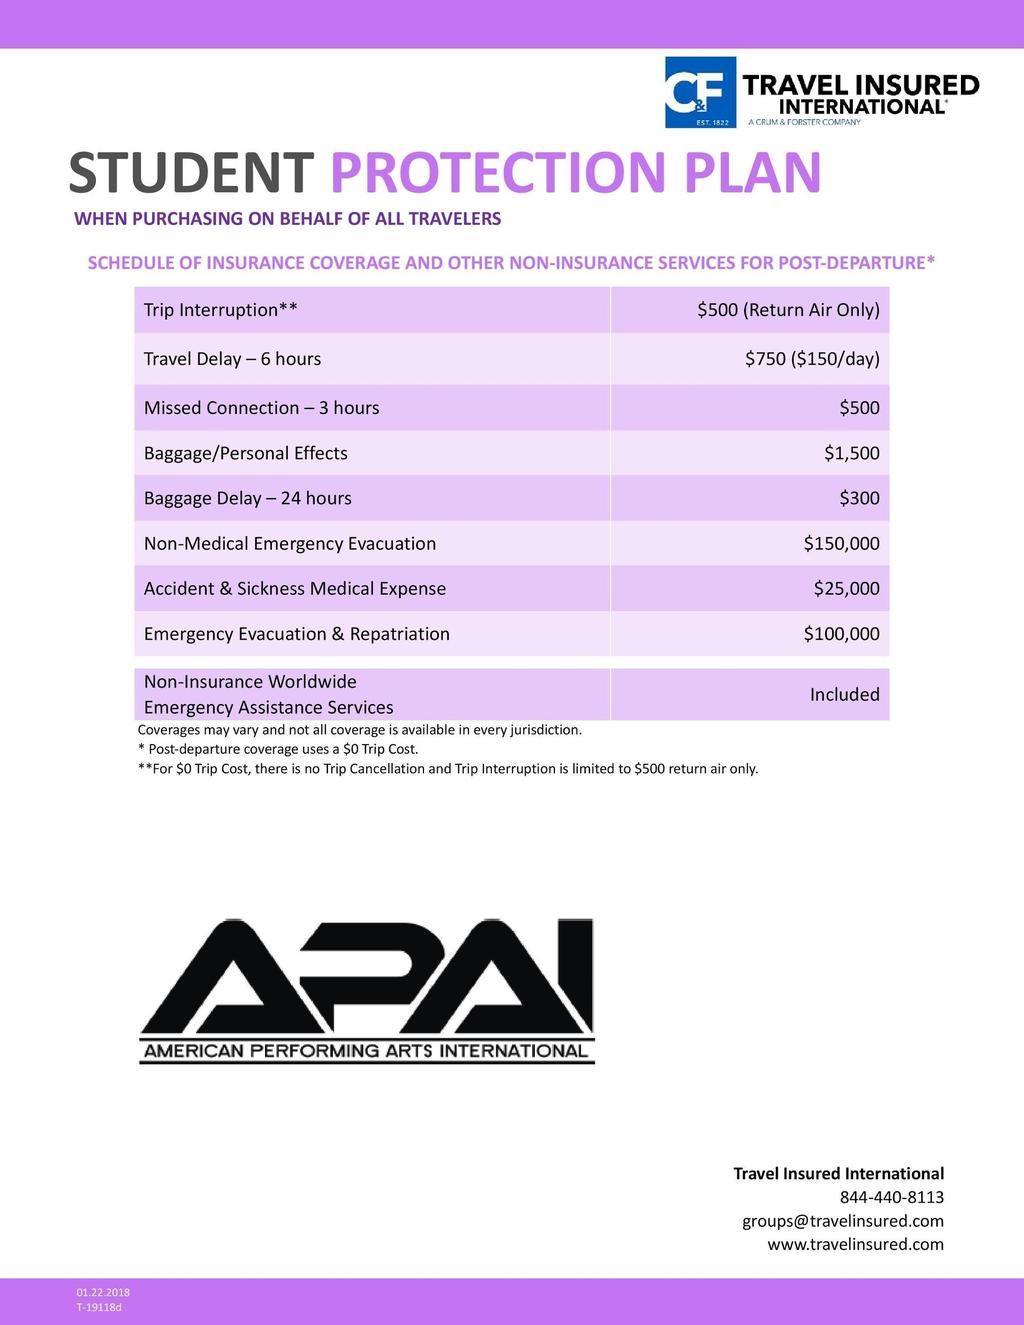 APAI purchases a Student Protection